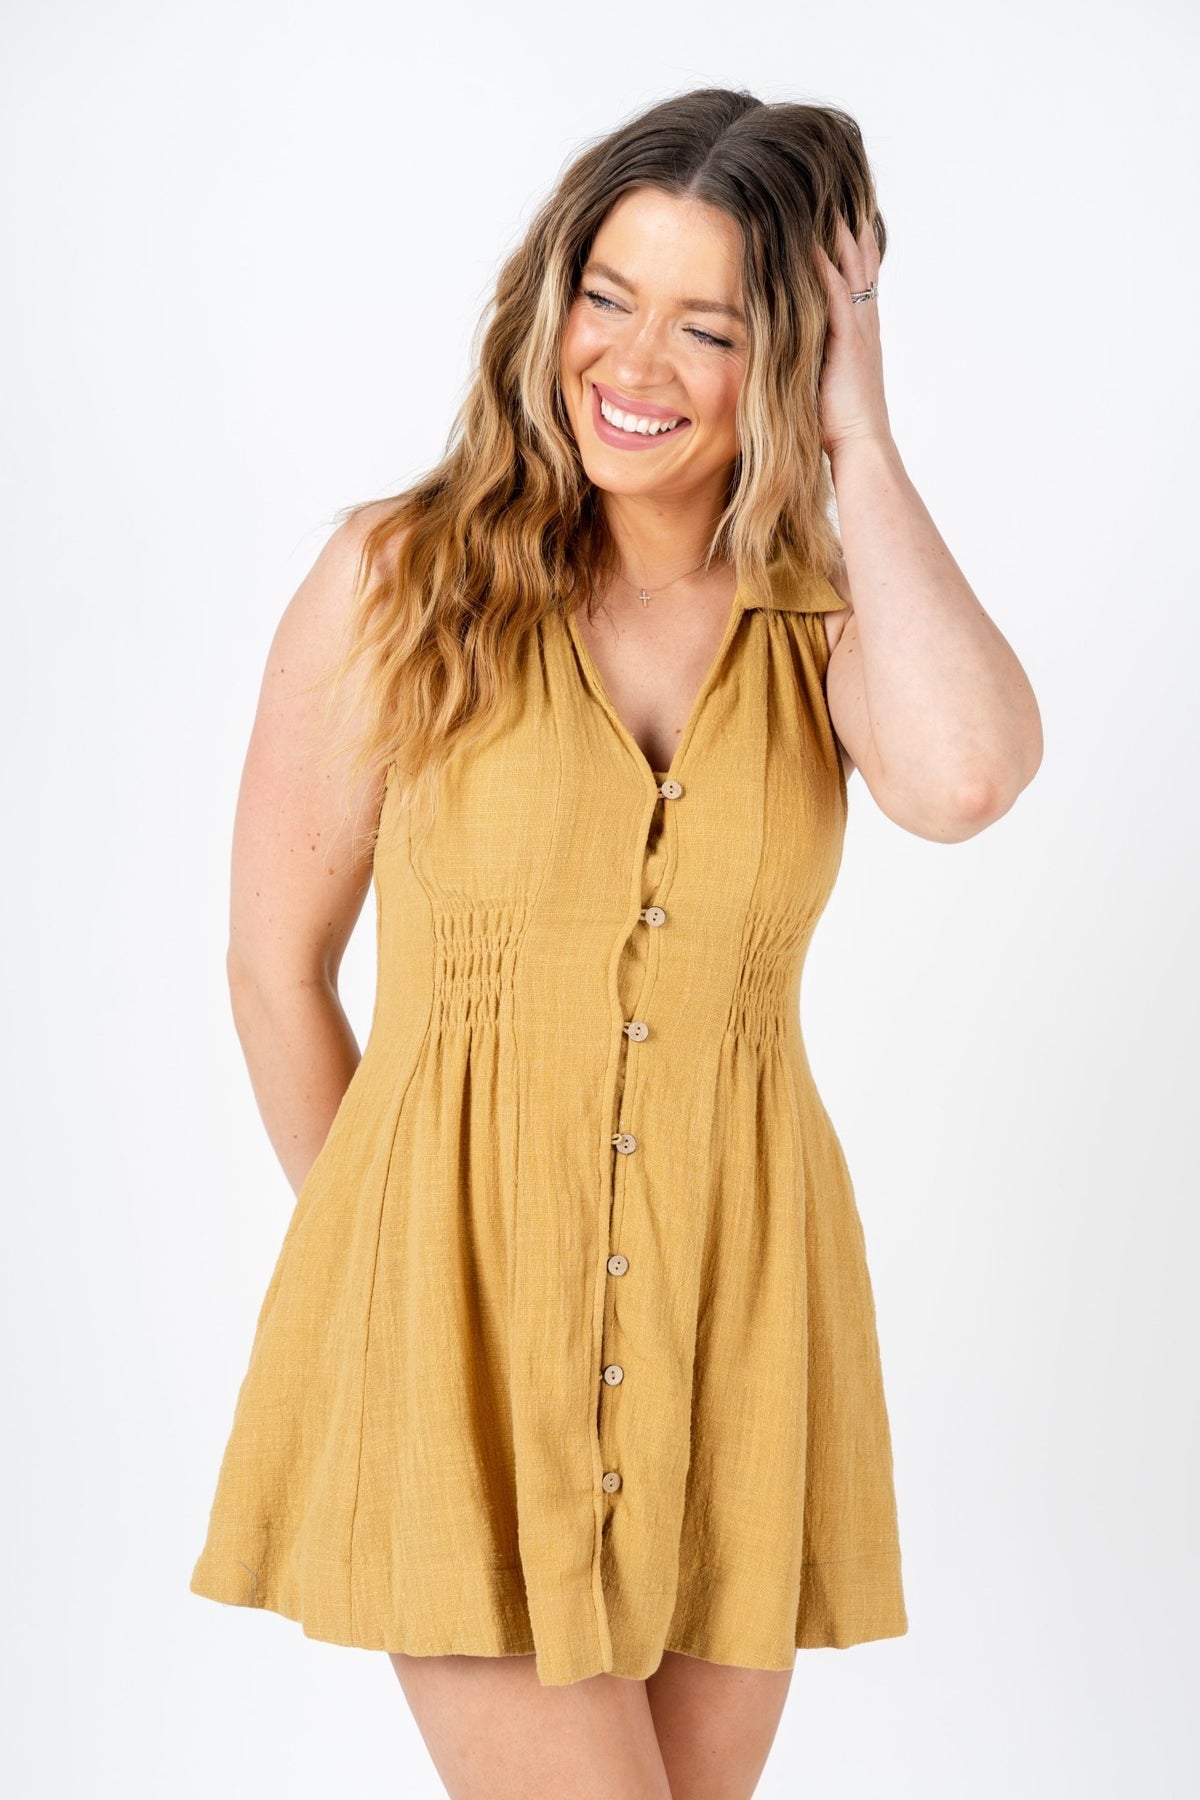 Smocked collared dress golden kiwi - Cute Dress - Trendy Dresses at Lush Fashion Lounge Boutique in Oklahoma City